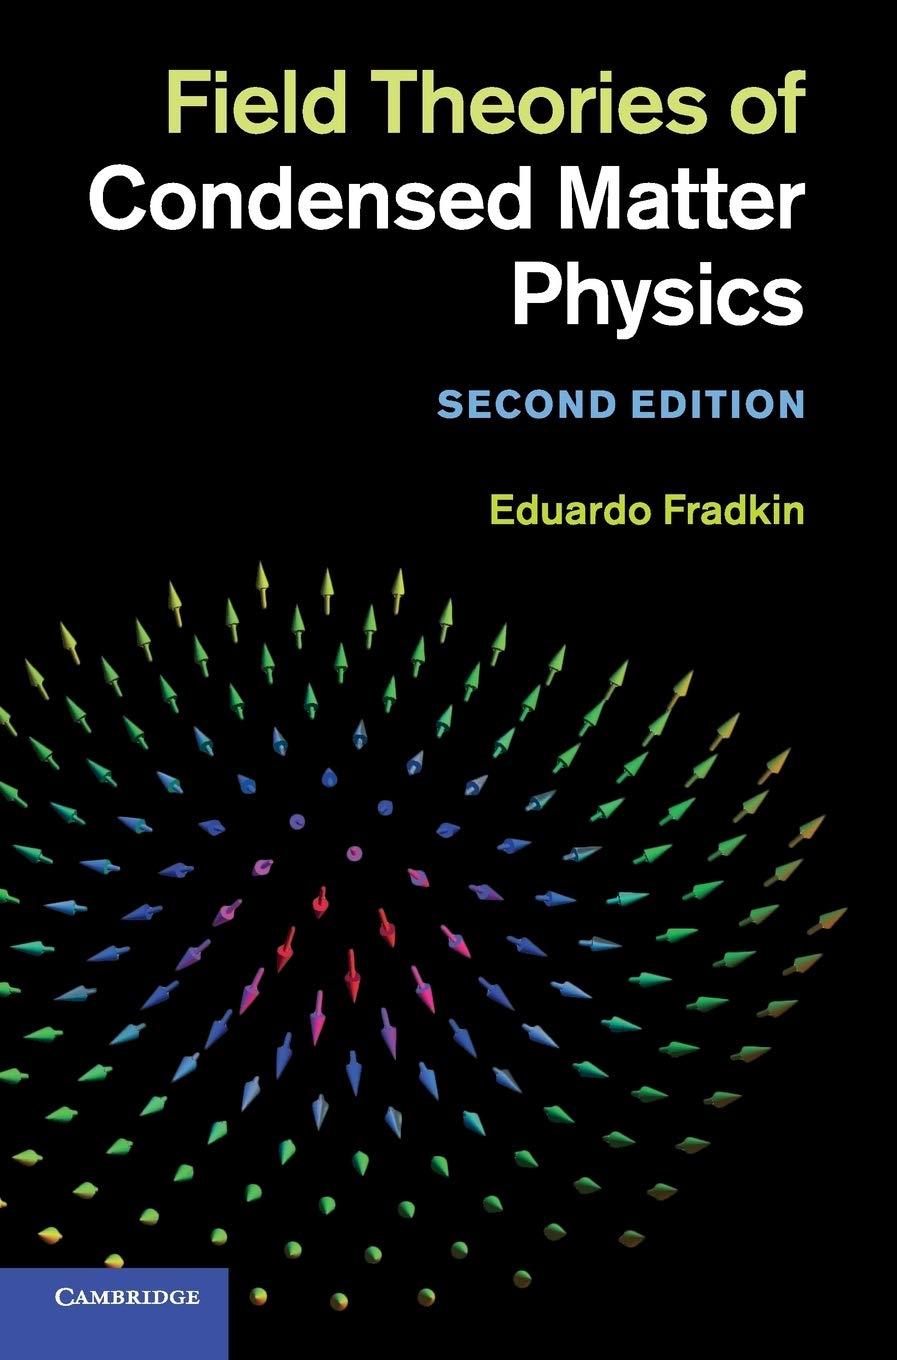 field theories of condensed matter physics 2nd edition eduardo fradkin 0521764440, 978-0521764445